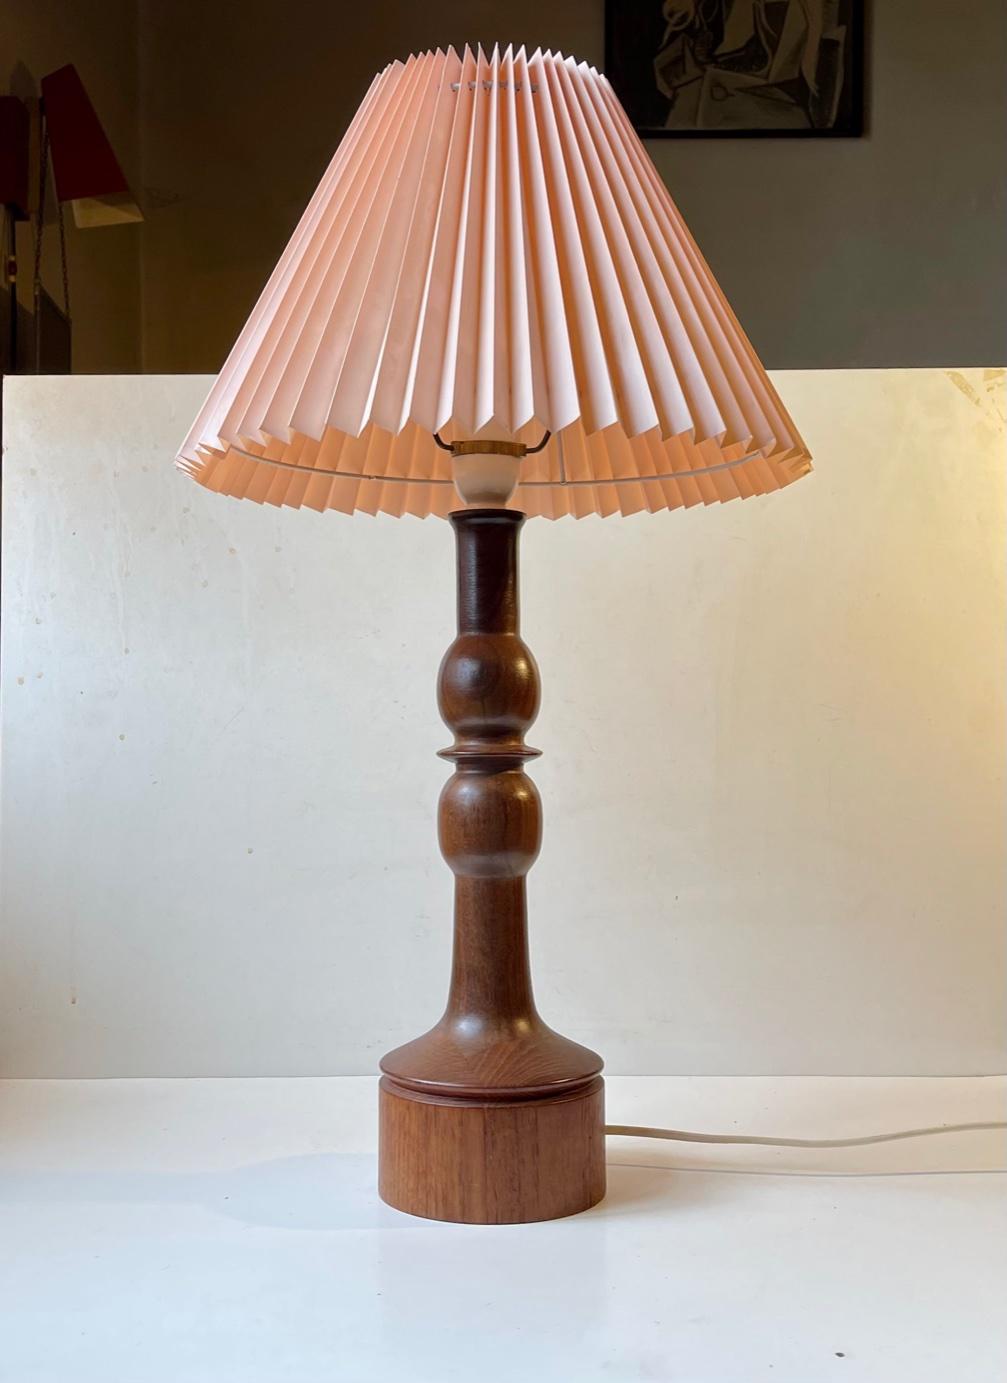 A wellmade Table lamp in solid teak and walnut. Engine turned and stacked making a subtle stylish pattern at the base. Anonymous Swedish cabinetmaker circa 1960 in a style reminiscent of Luxus and Severin Hansen. Measurements: Height: 54 cm with the